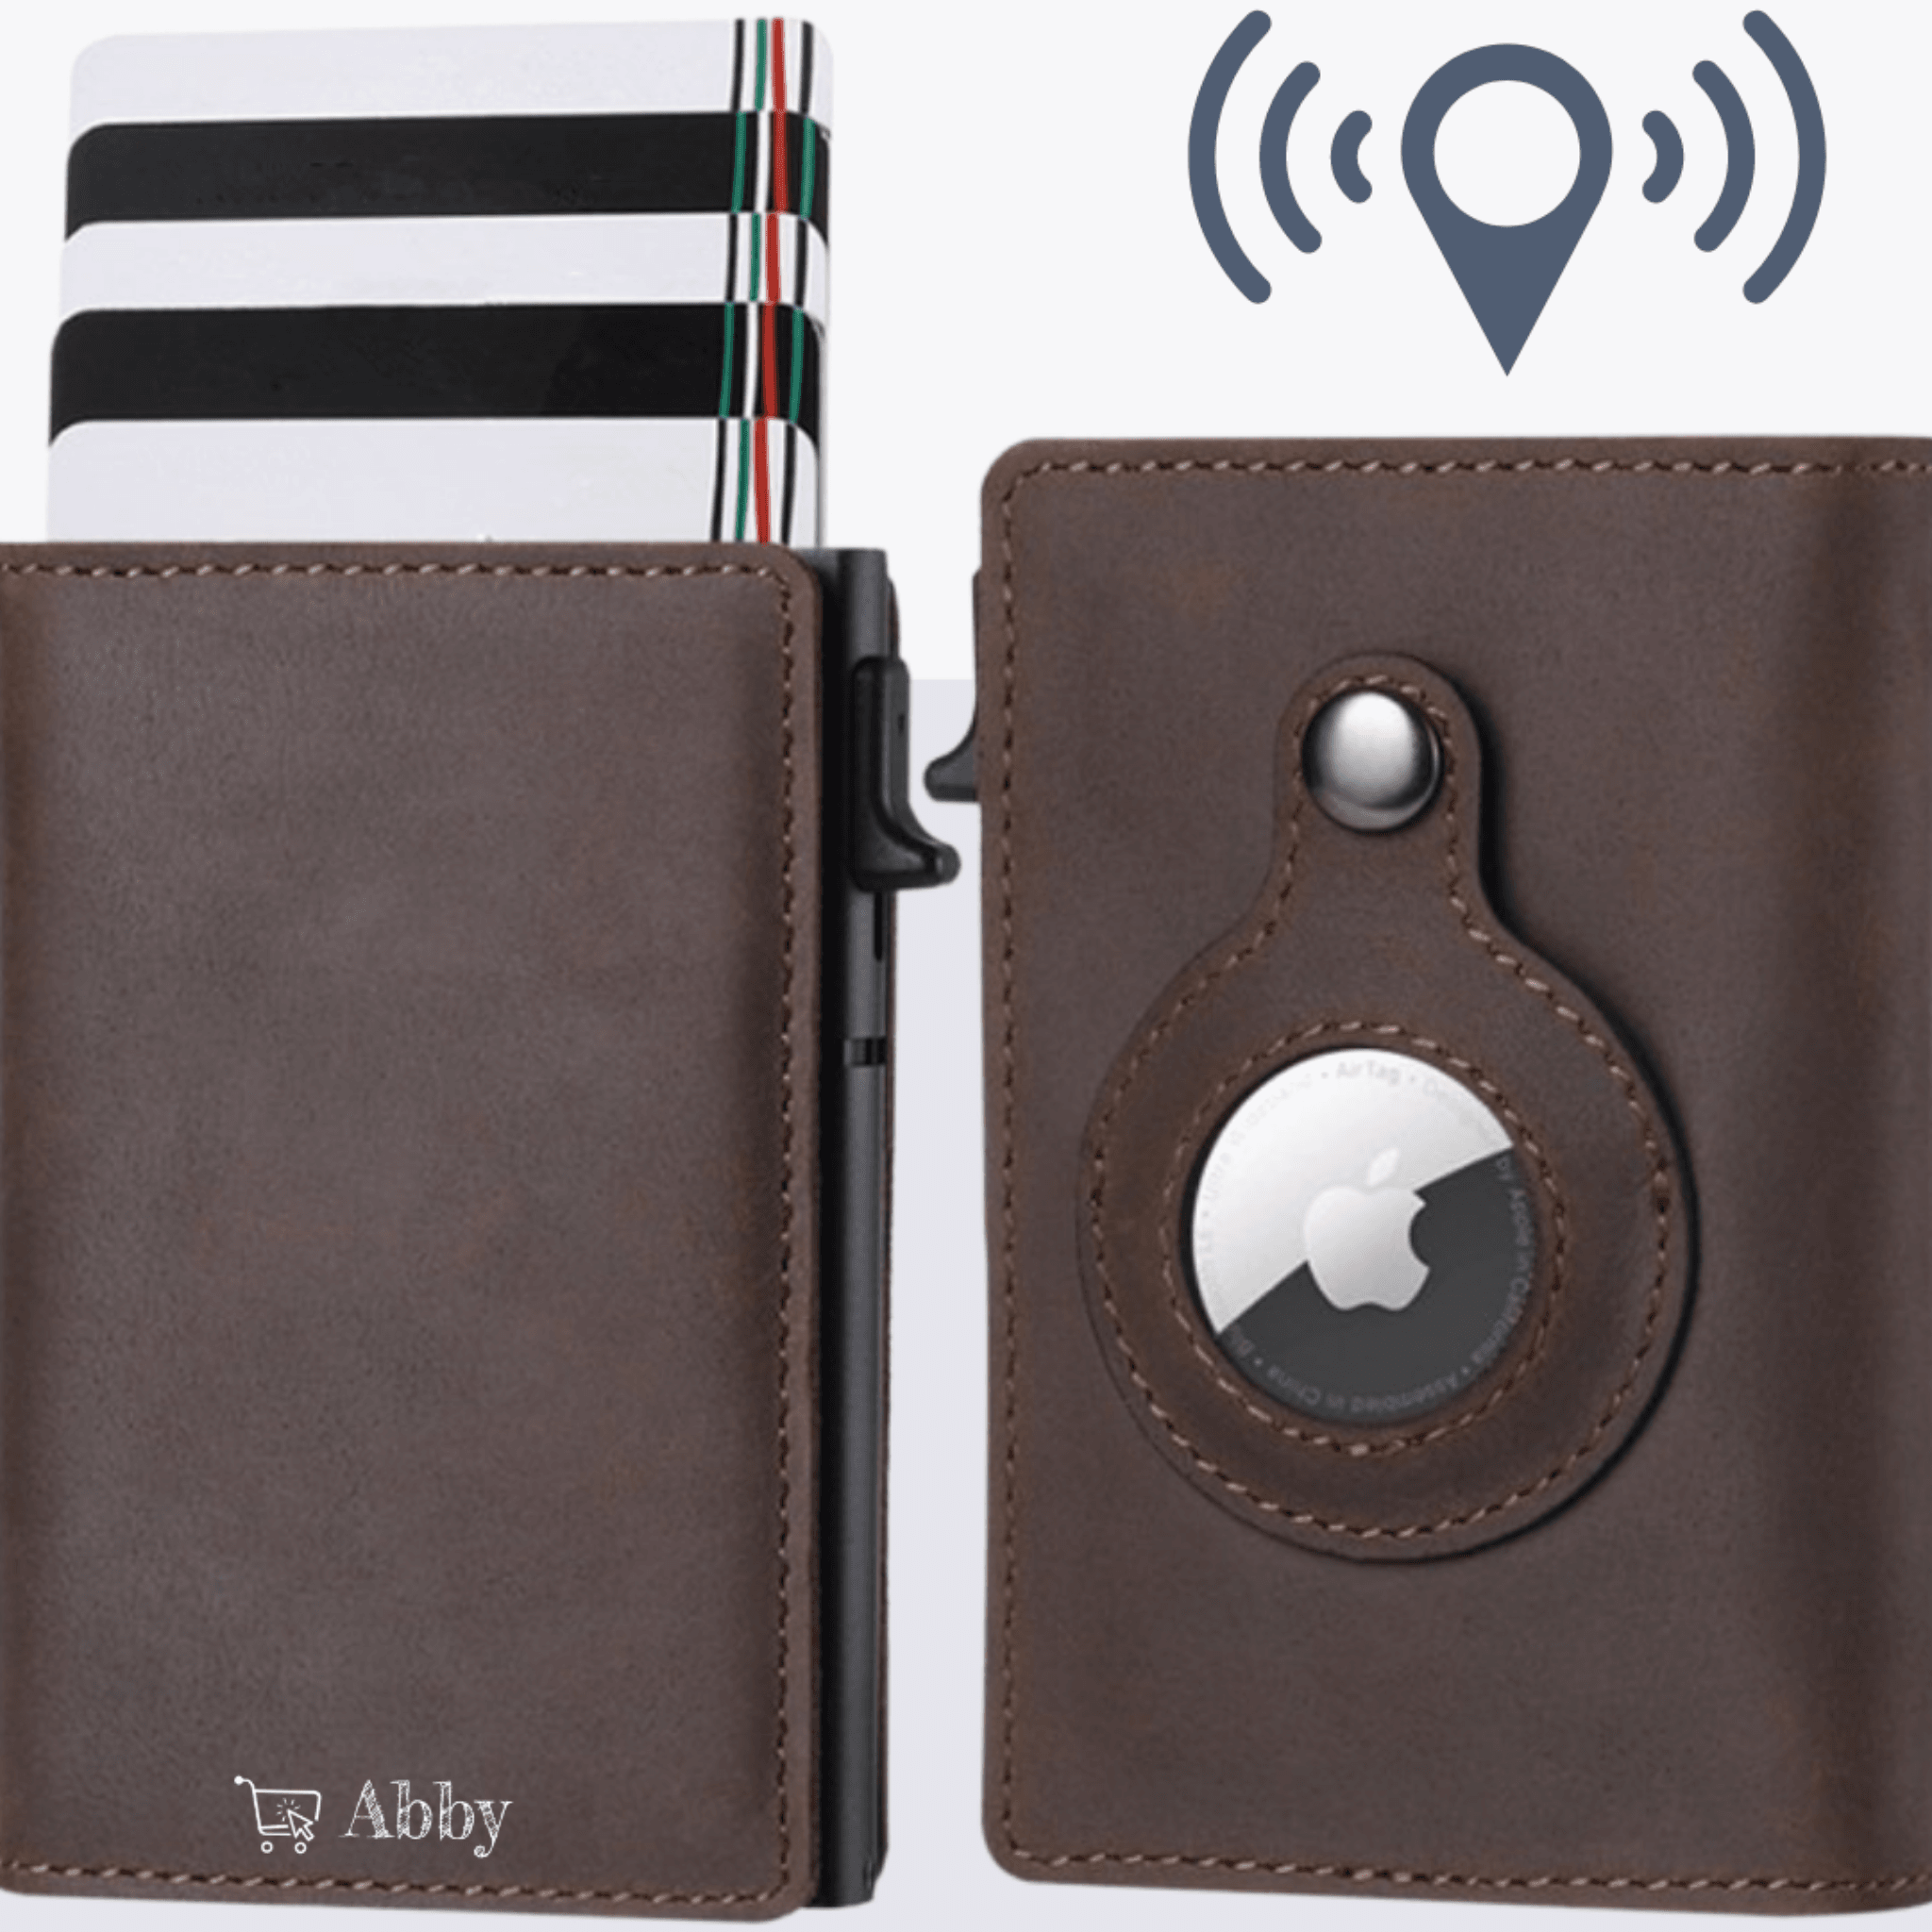 Apple AirTag Wallet/Leather Card Holder #1012